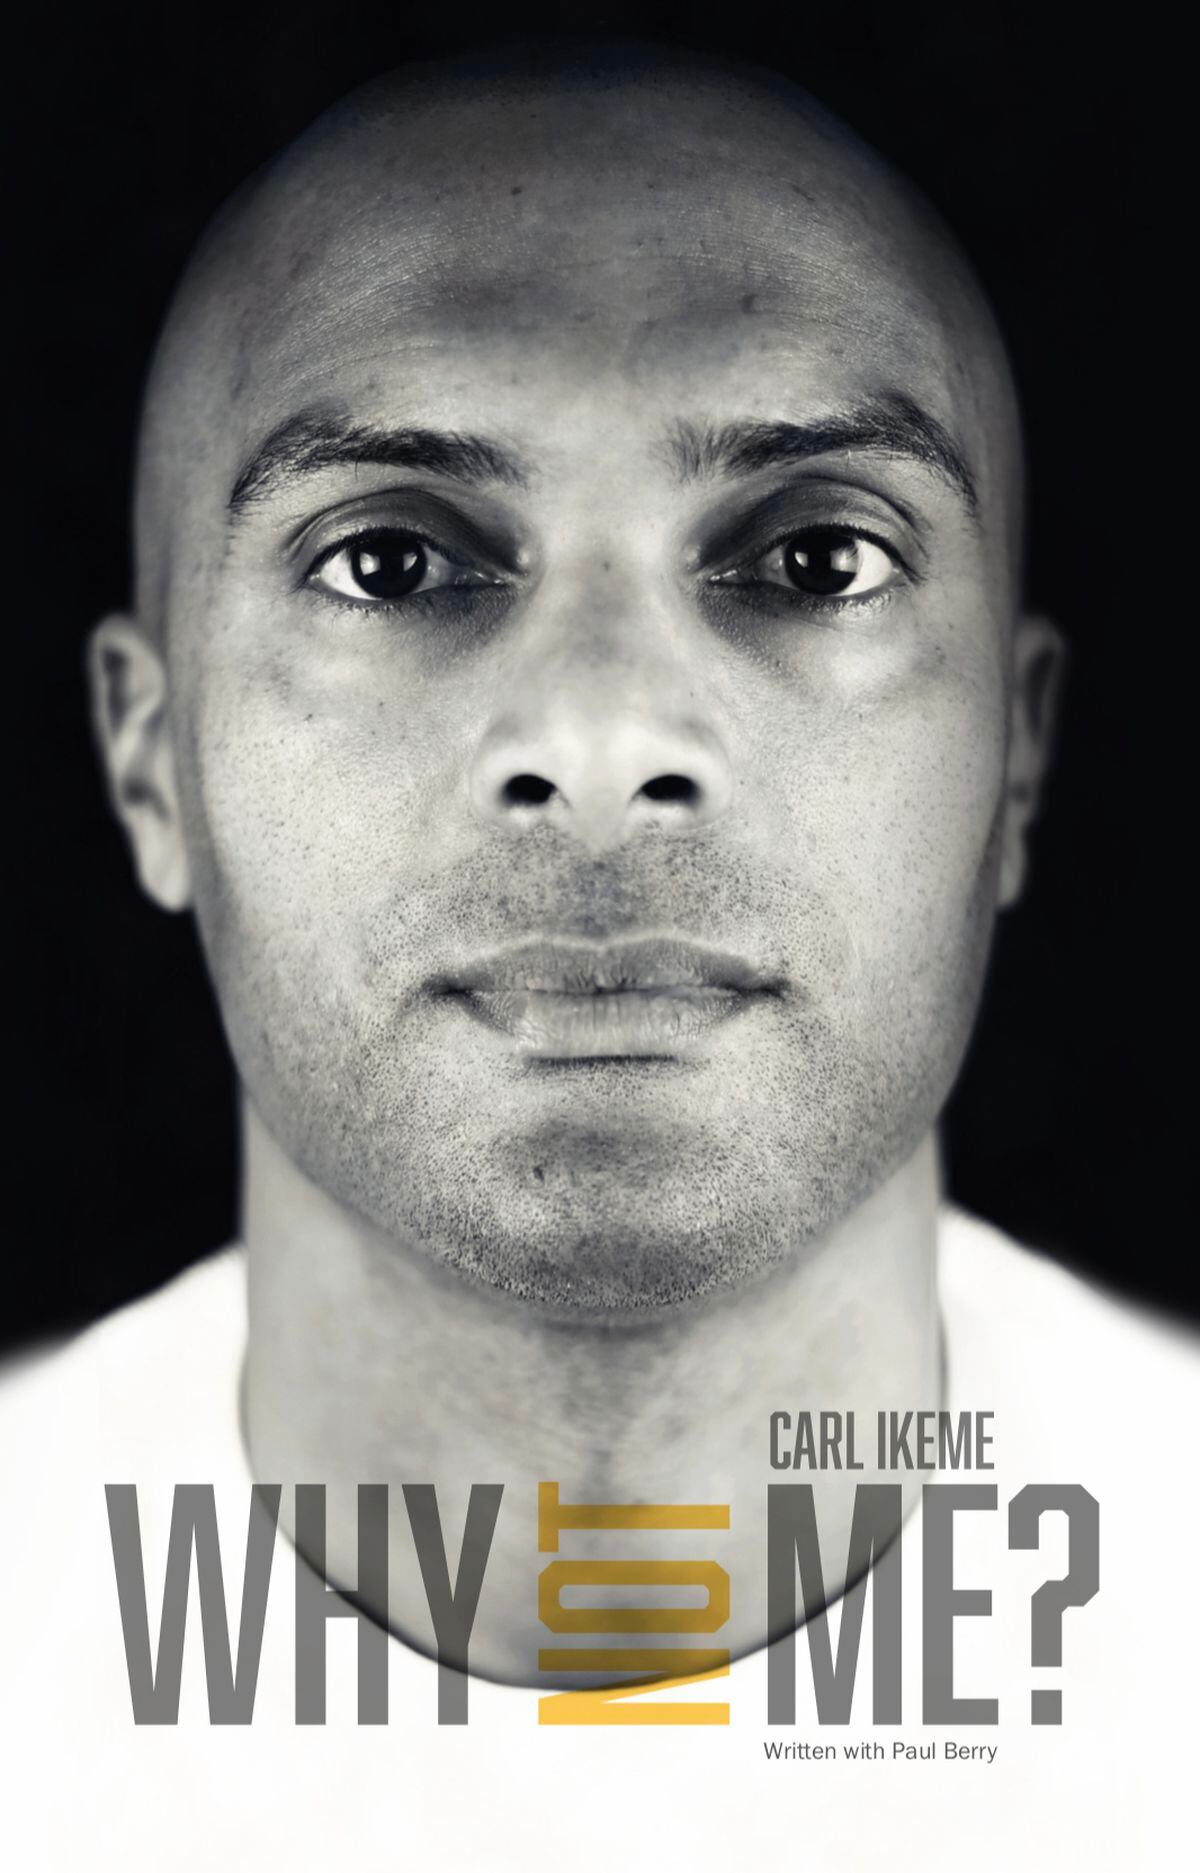 Carl Ikeme's book Why Not Me? written with Paul Berry